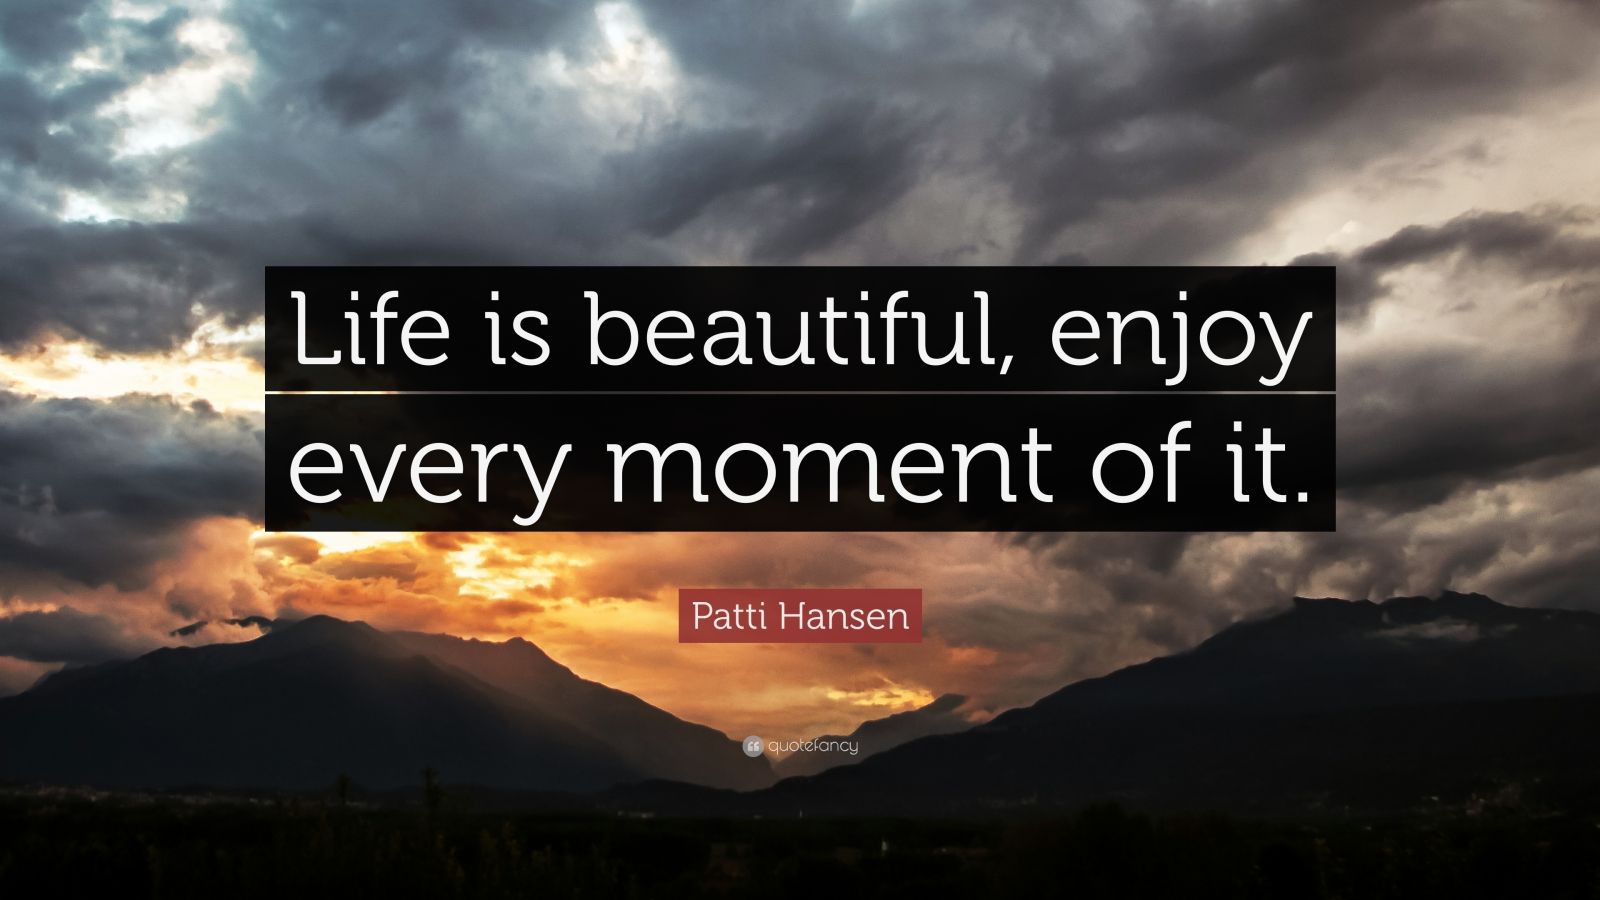 Patti Hansen Quote: “Life is beautiful, enjoy every moment of it.” (9